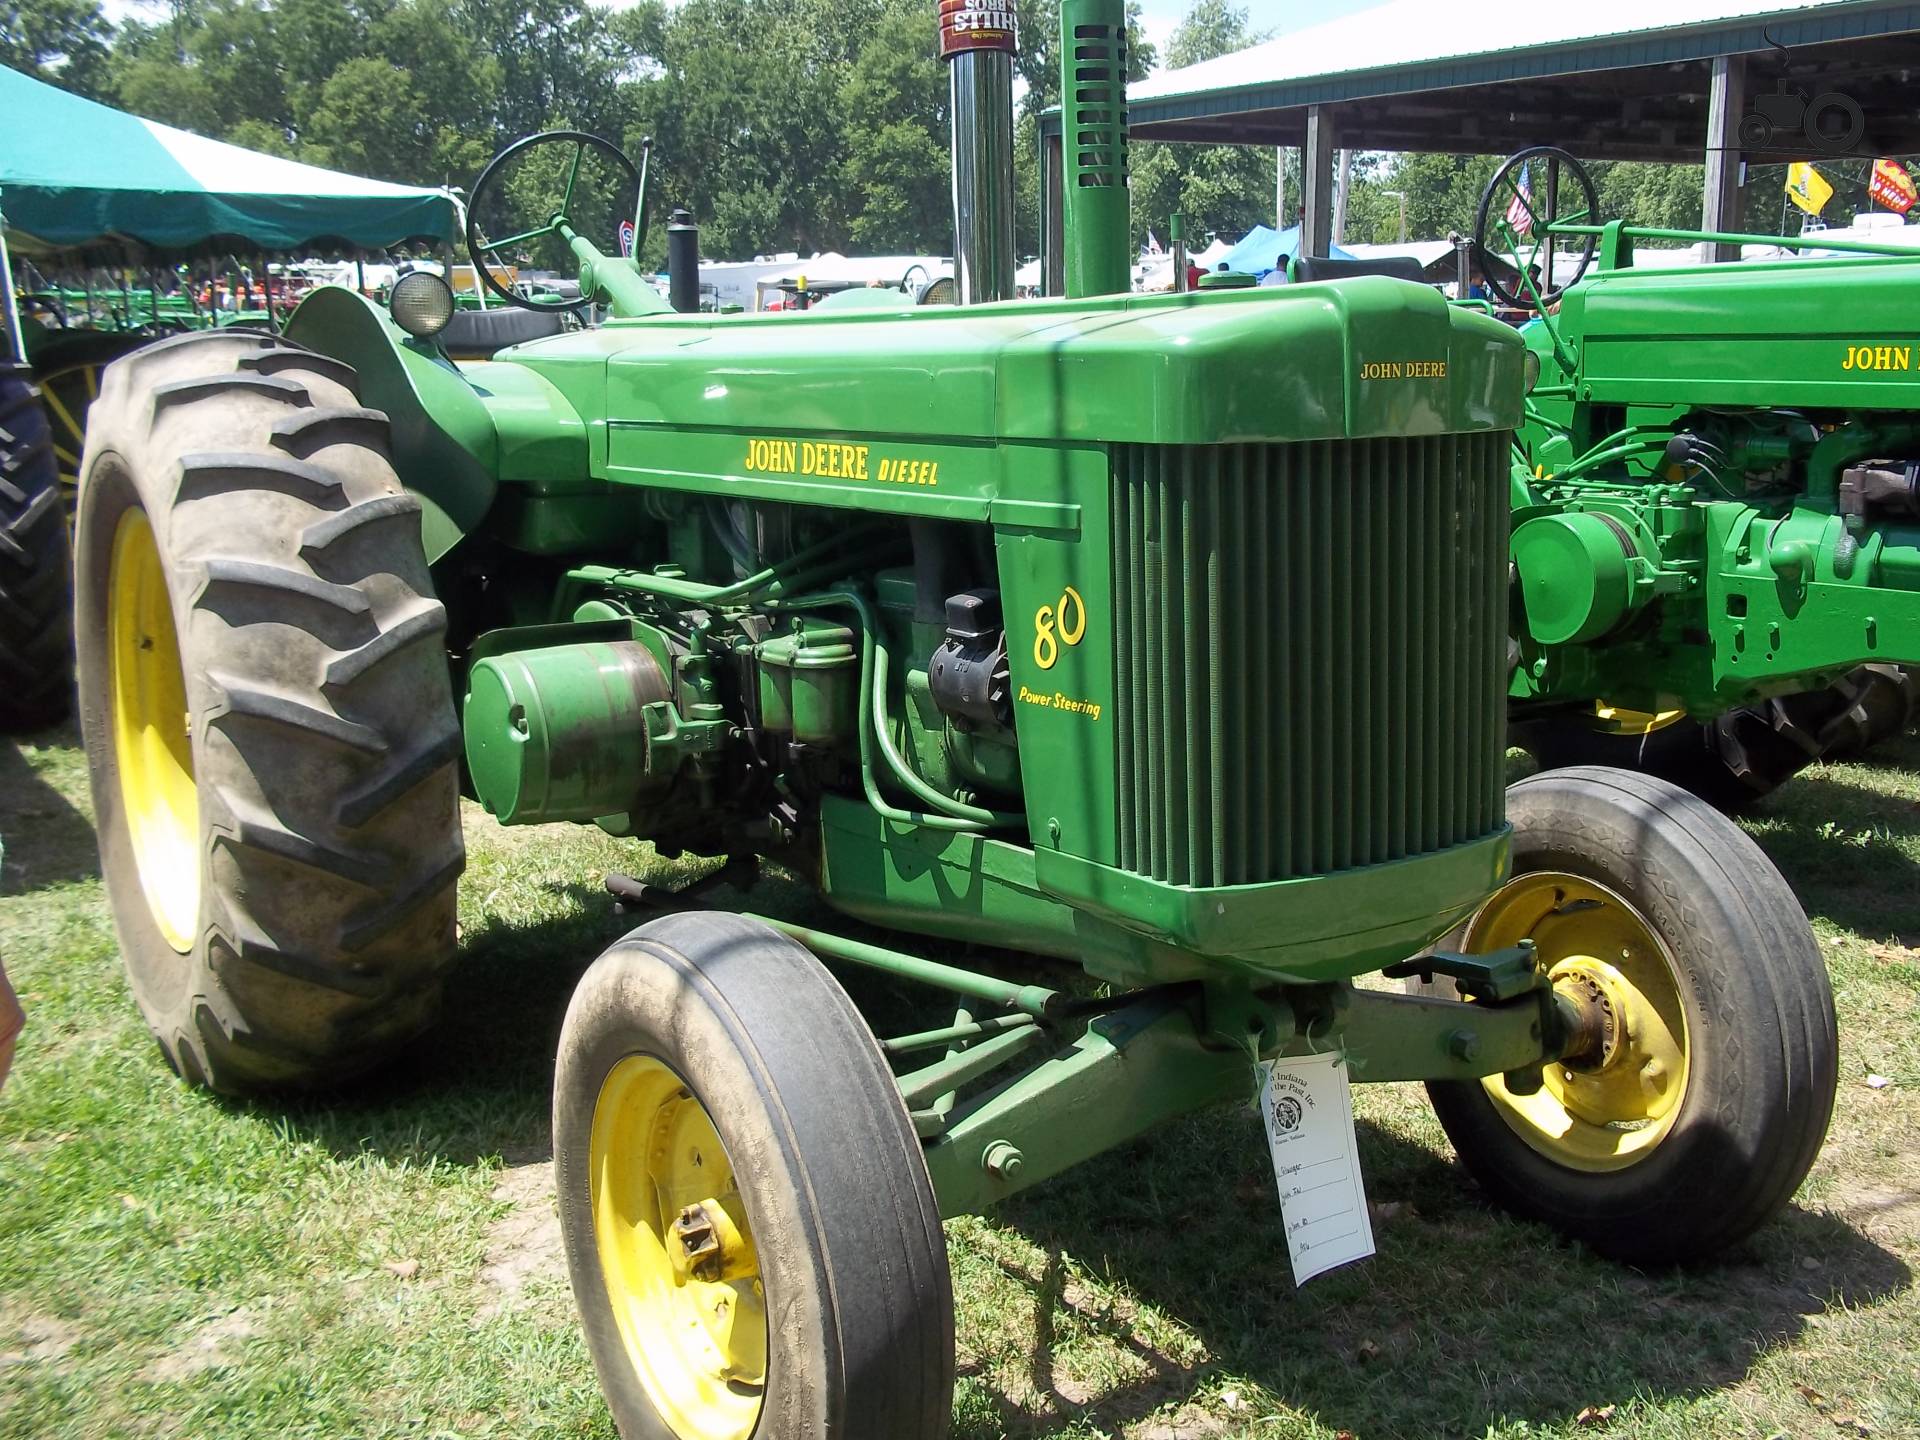 John Deere 80 Specs and data - Everything about the John Deere 80